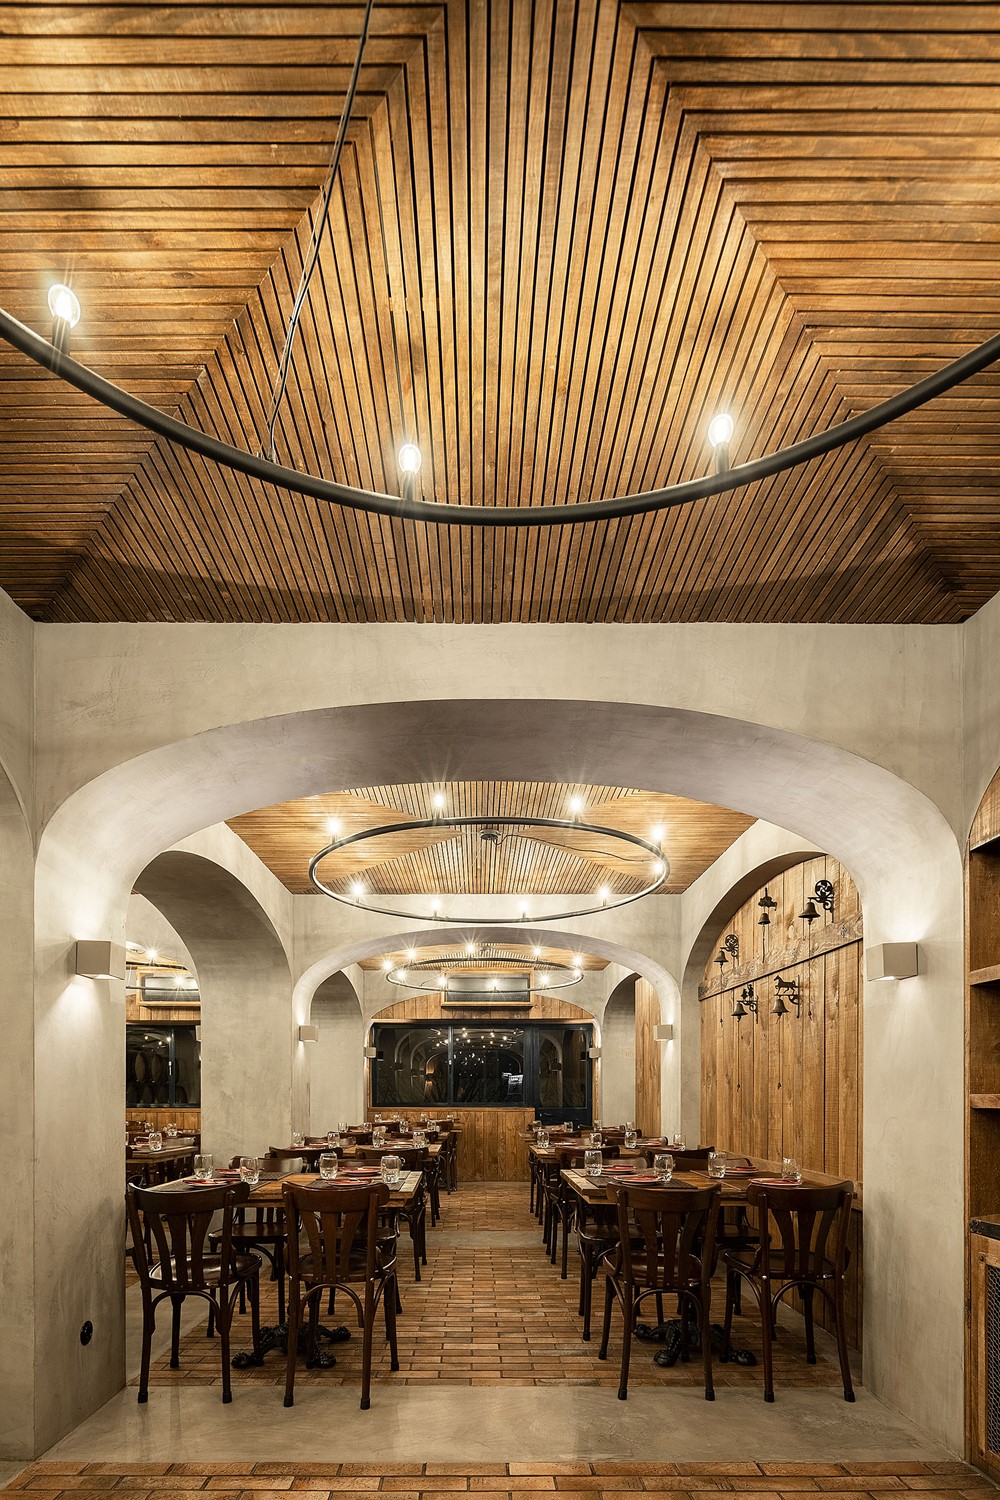 BARRIL restaurant by PAULO MERLINI architects